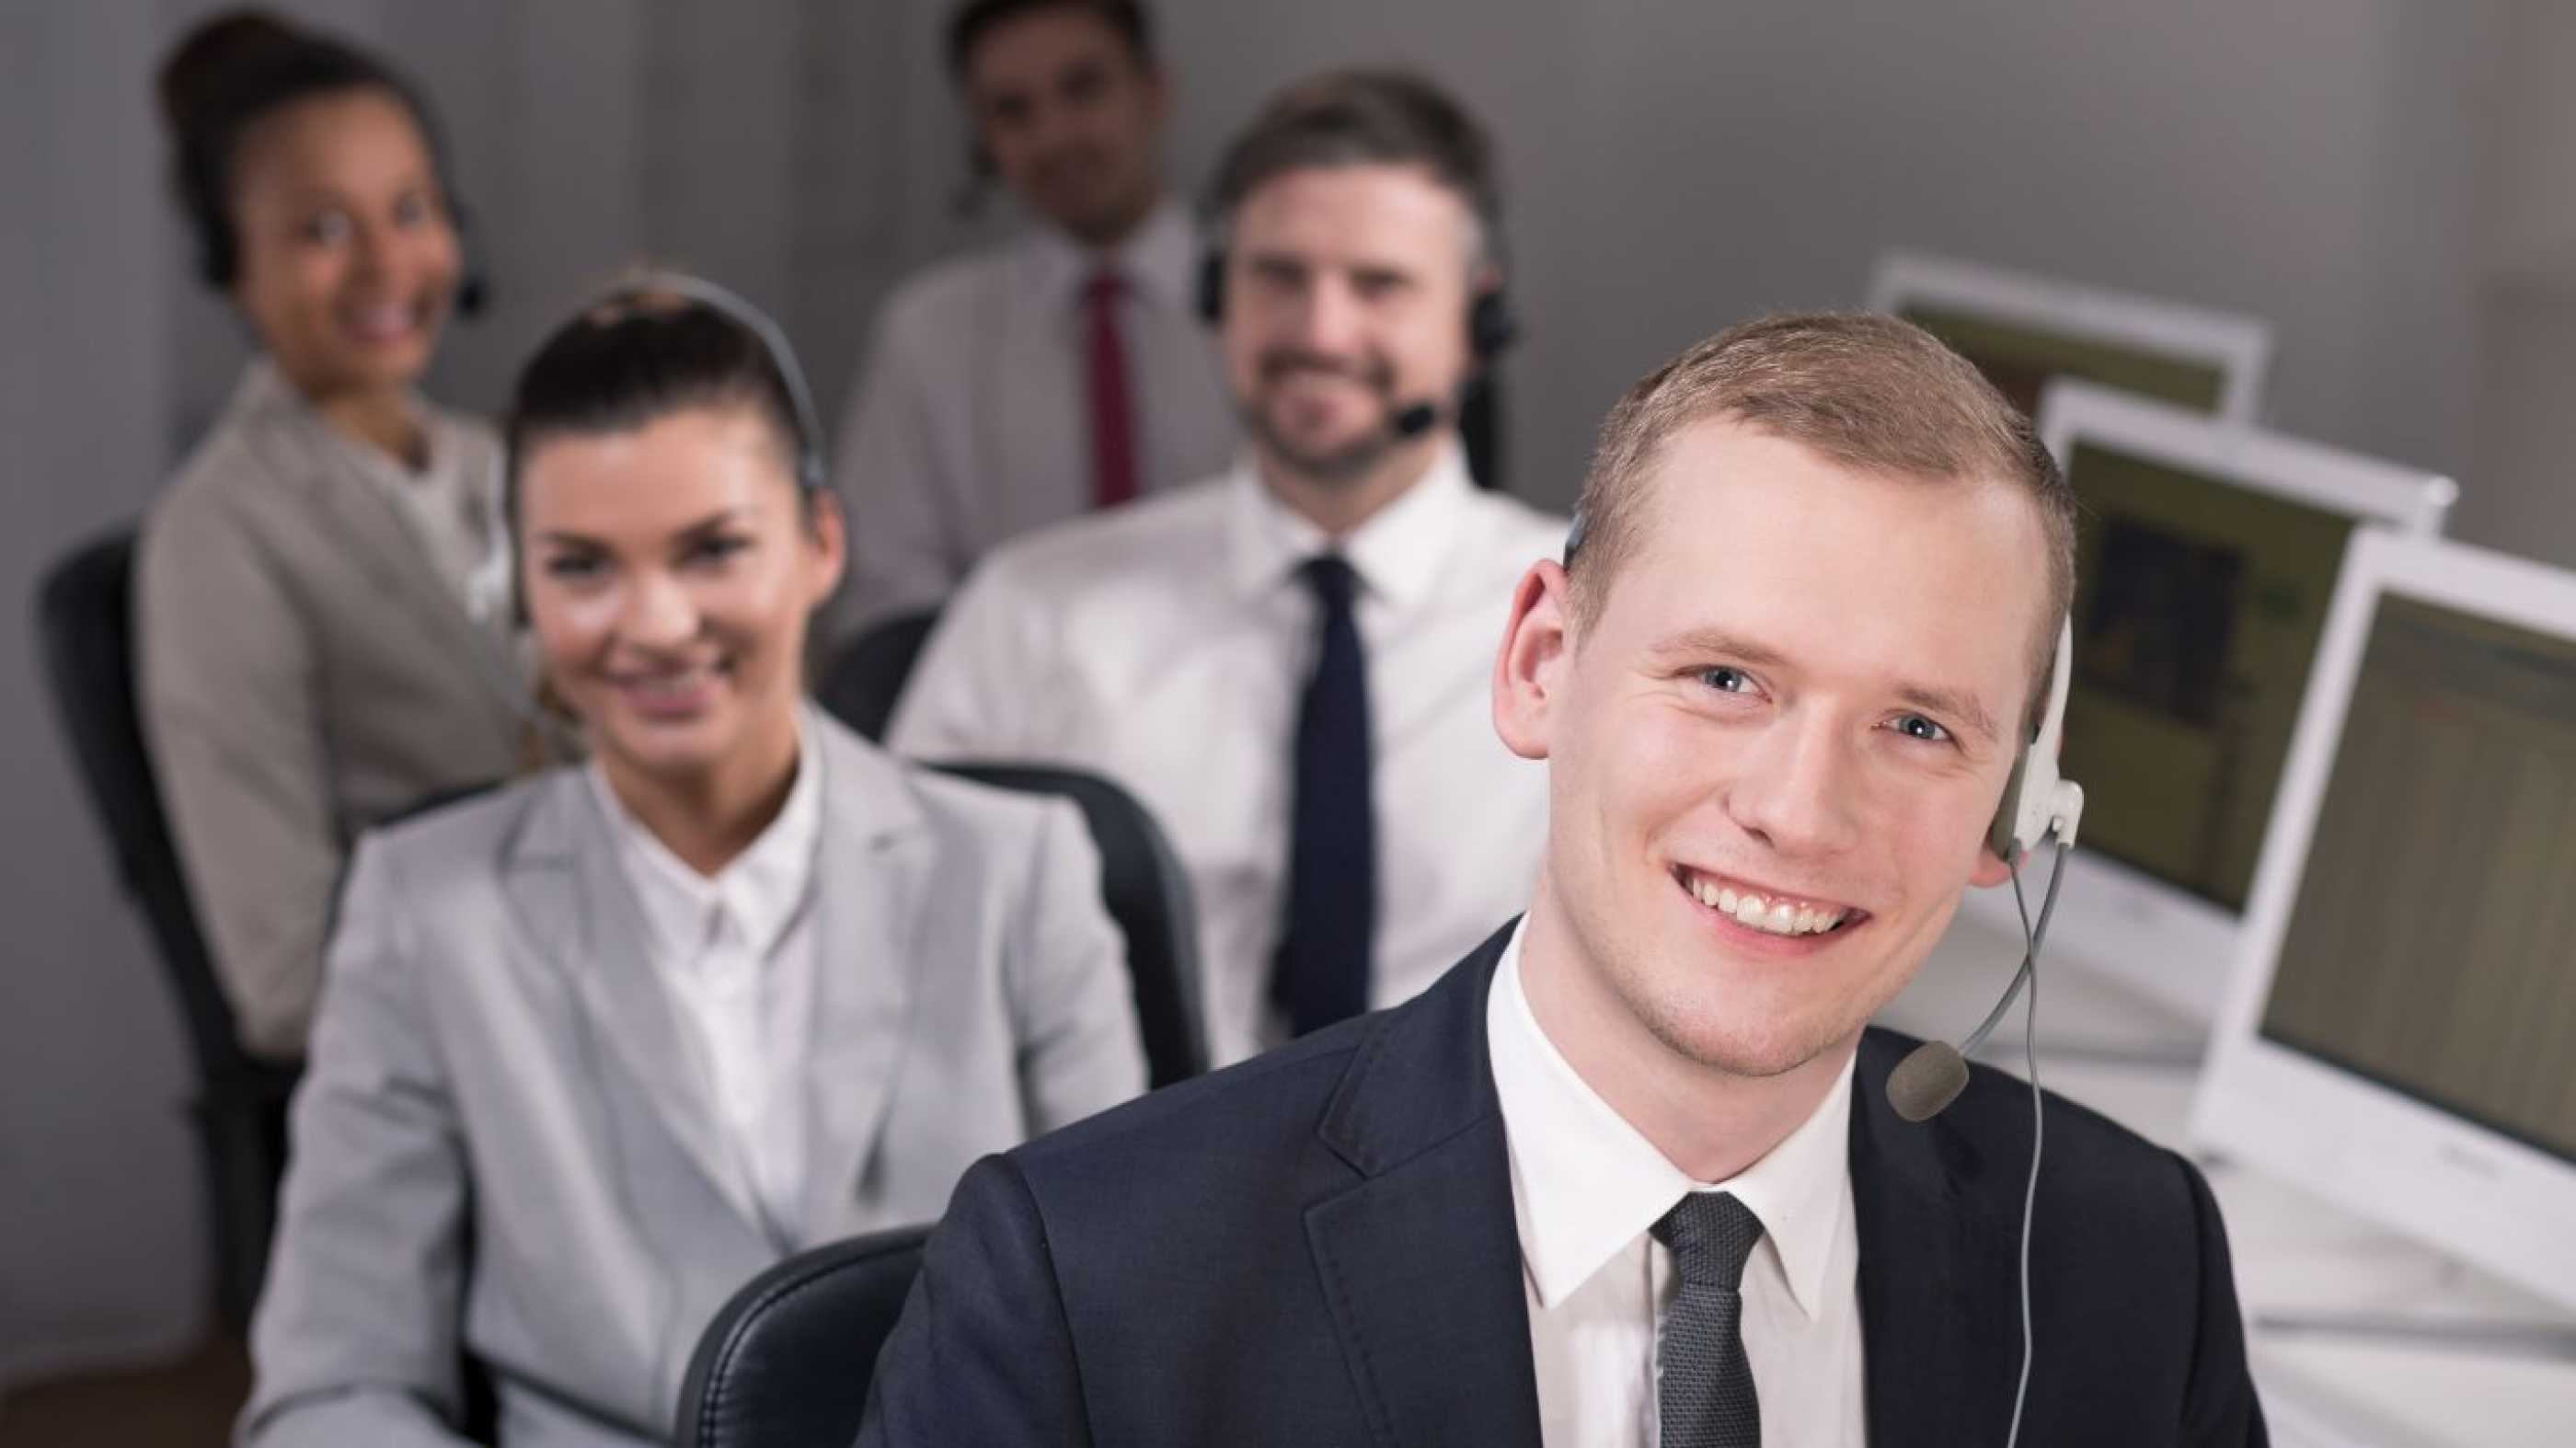 Smiling people in a call centre